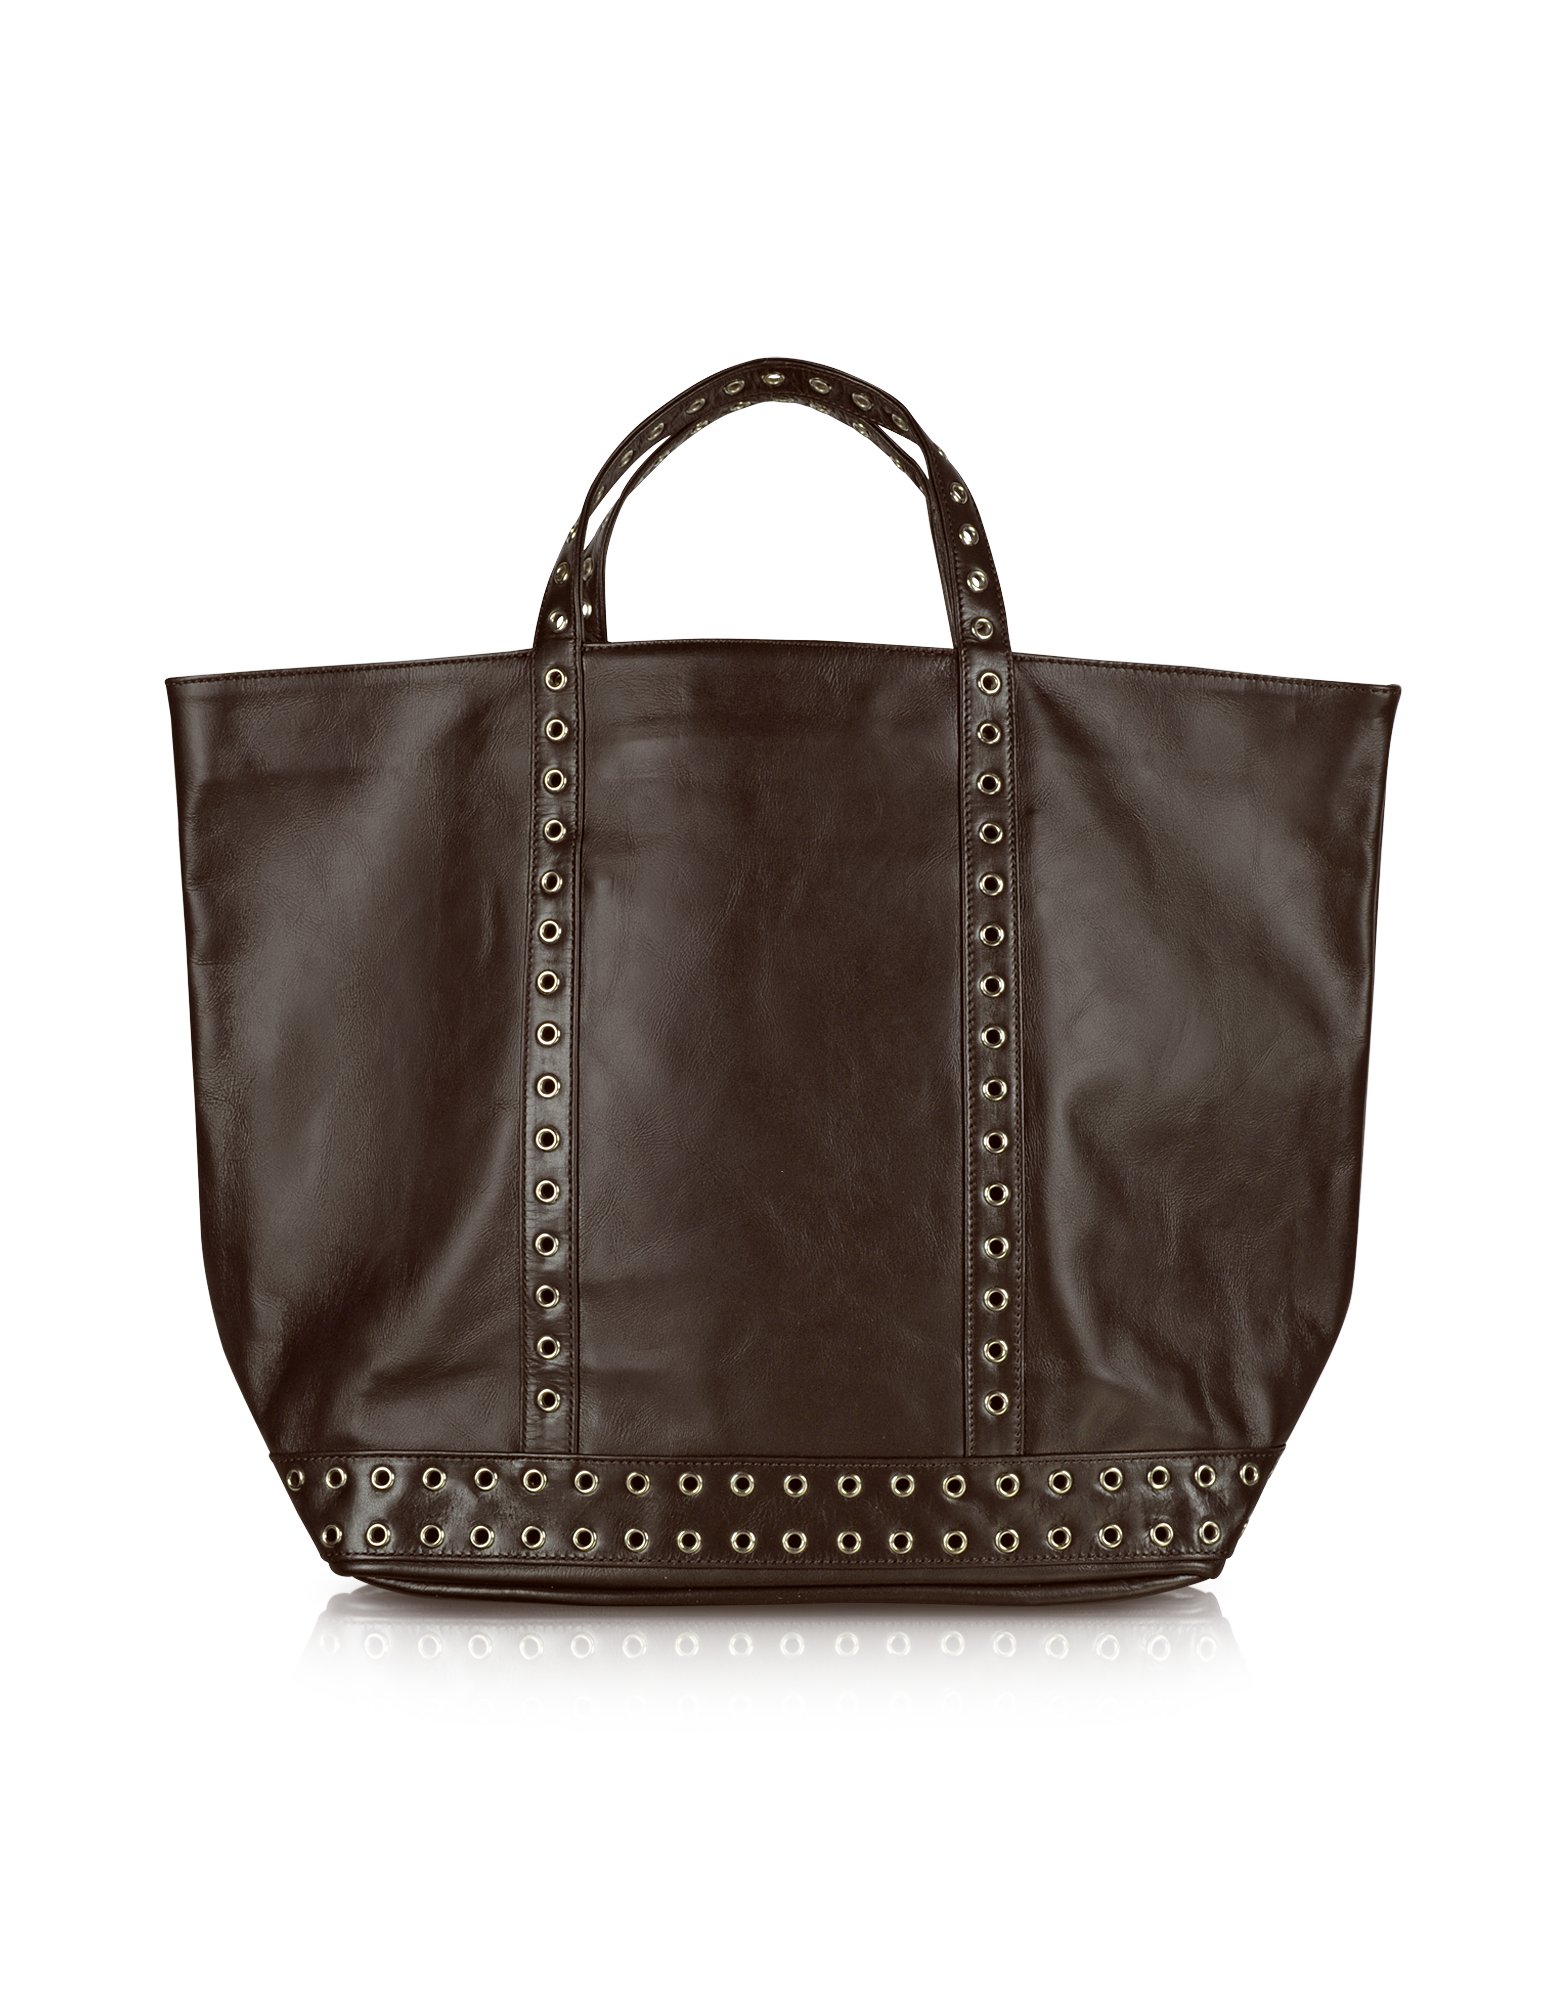 Lyst - Vanessa Bruno Large Leather Tote Bag in Black